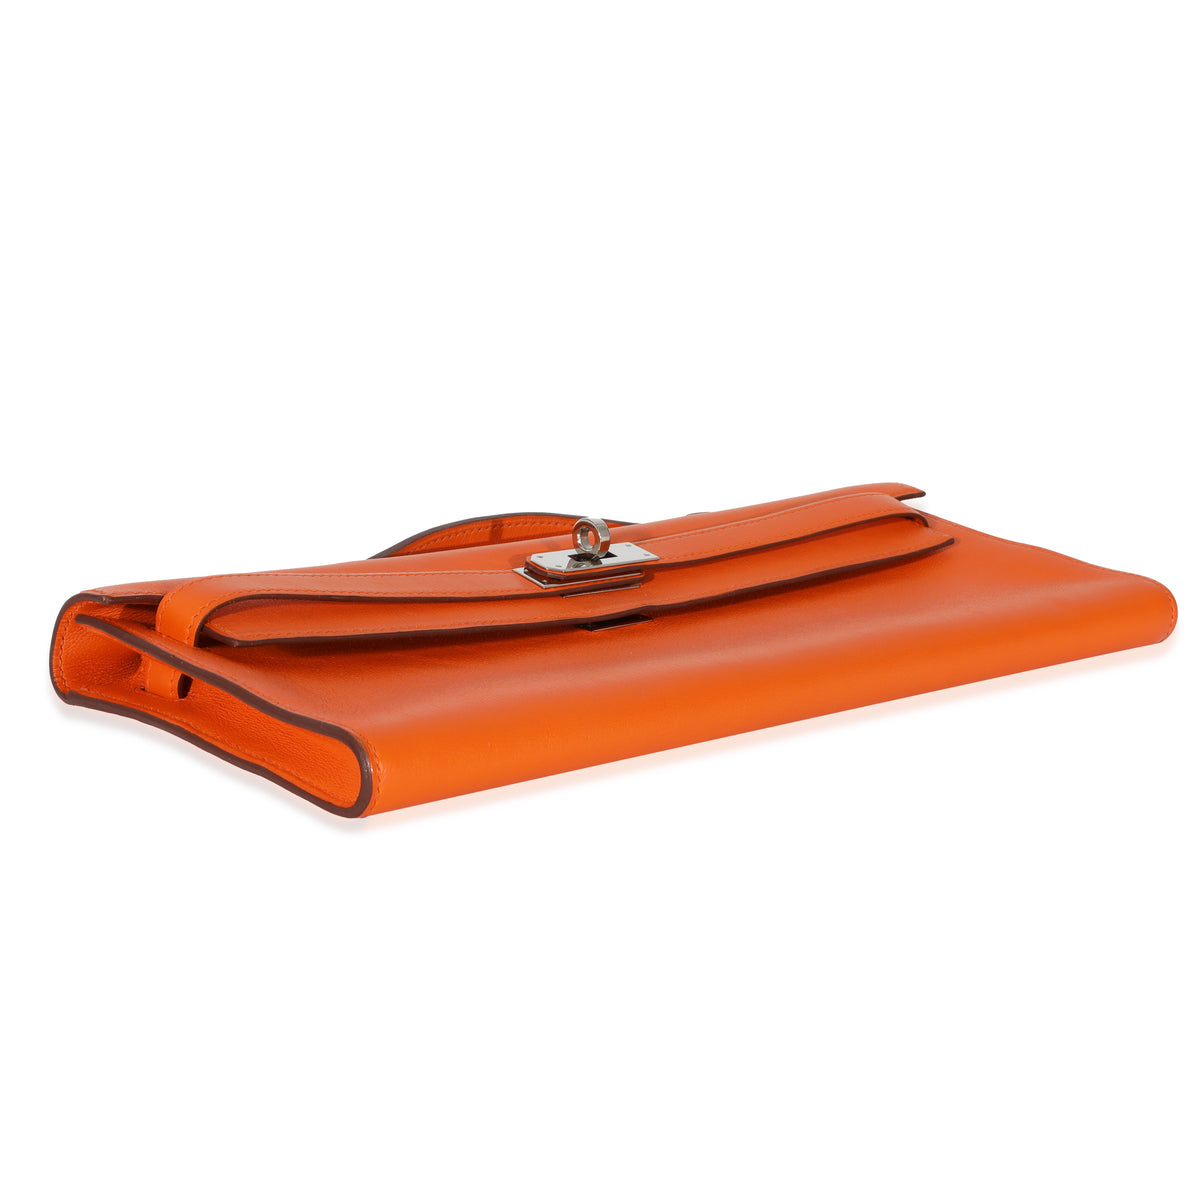 Hermès - Authenticated Kelly Cut Clutch Clutch Bag - Leather Orange Plain for Women, Very Good Condition